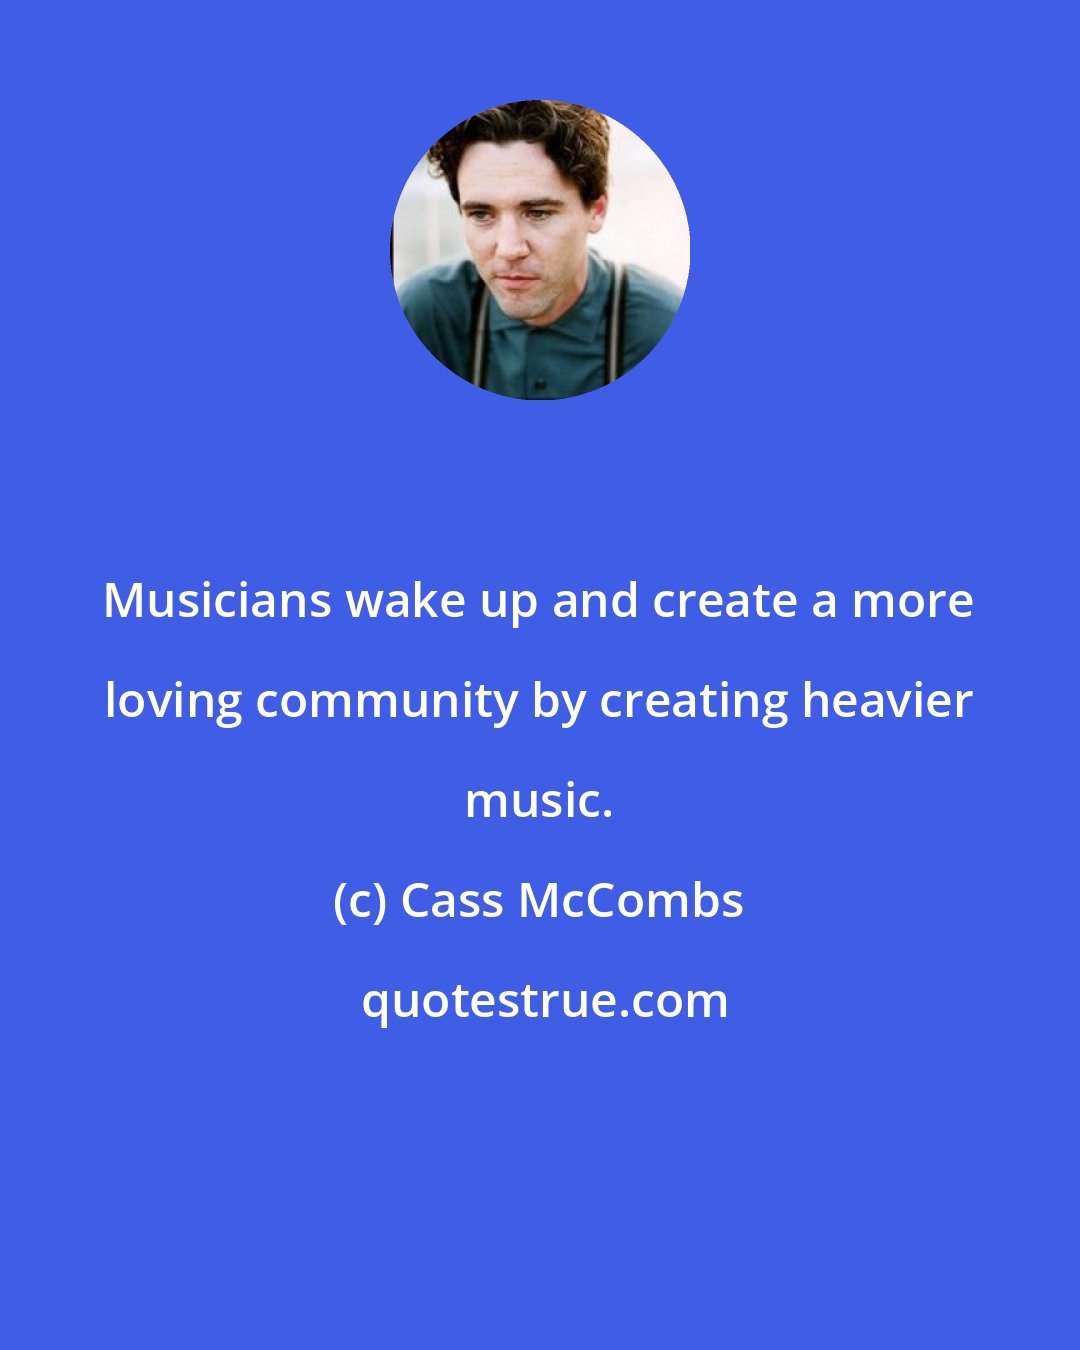 Cass McCombs: Musicians wake up and create a more loving community by creating heavier music.